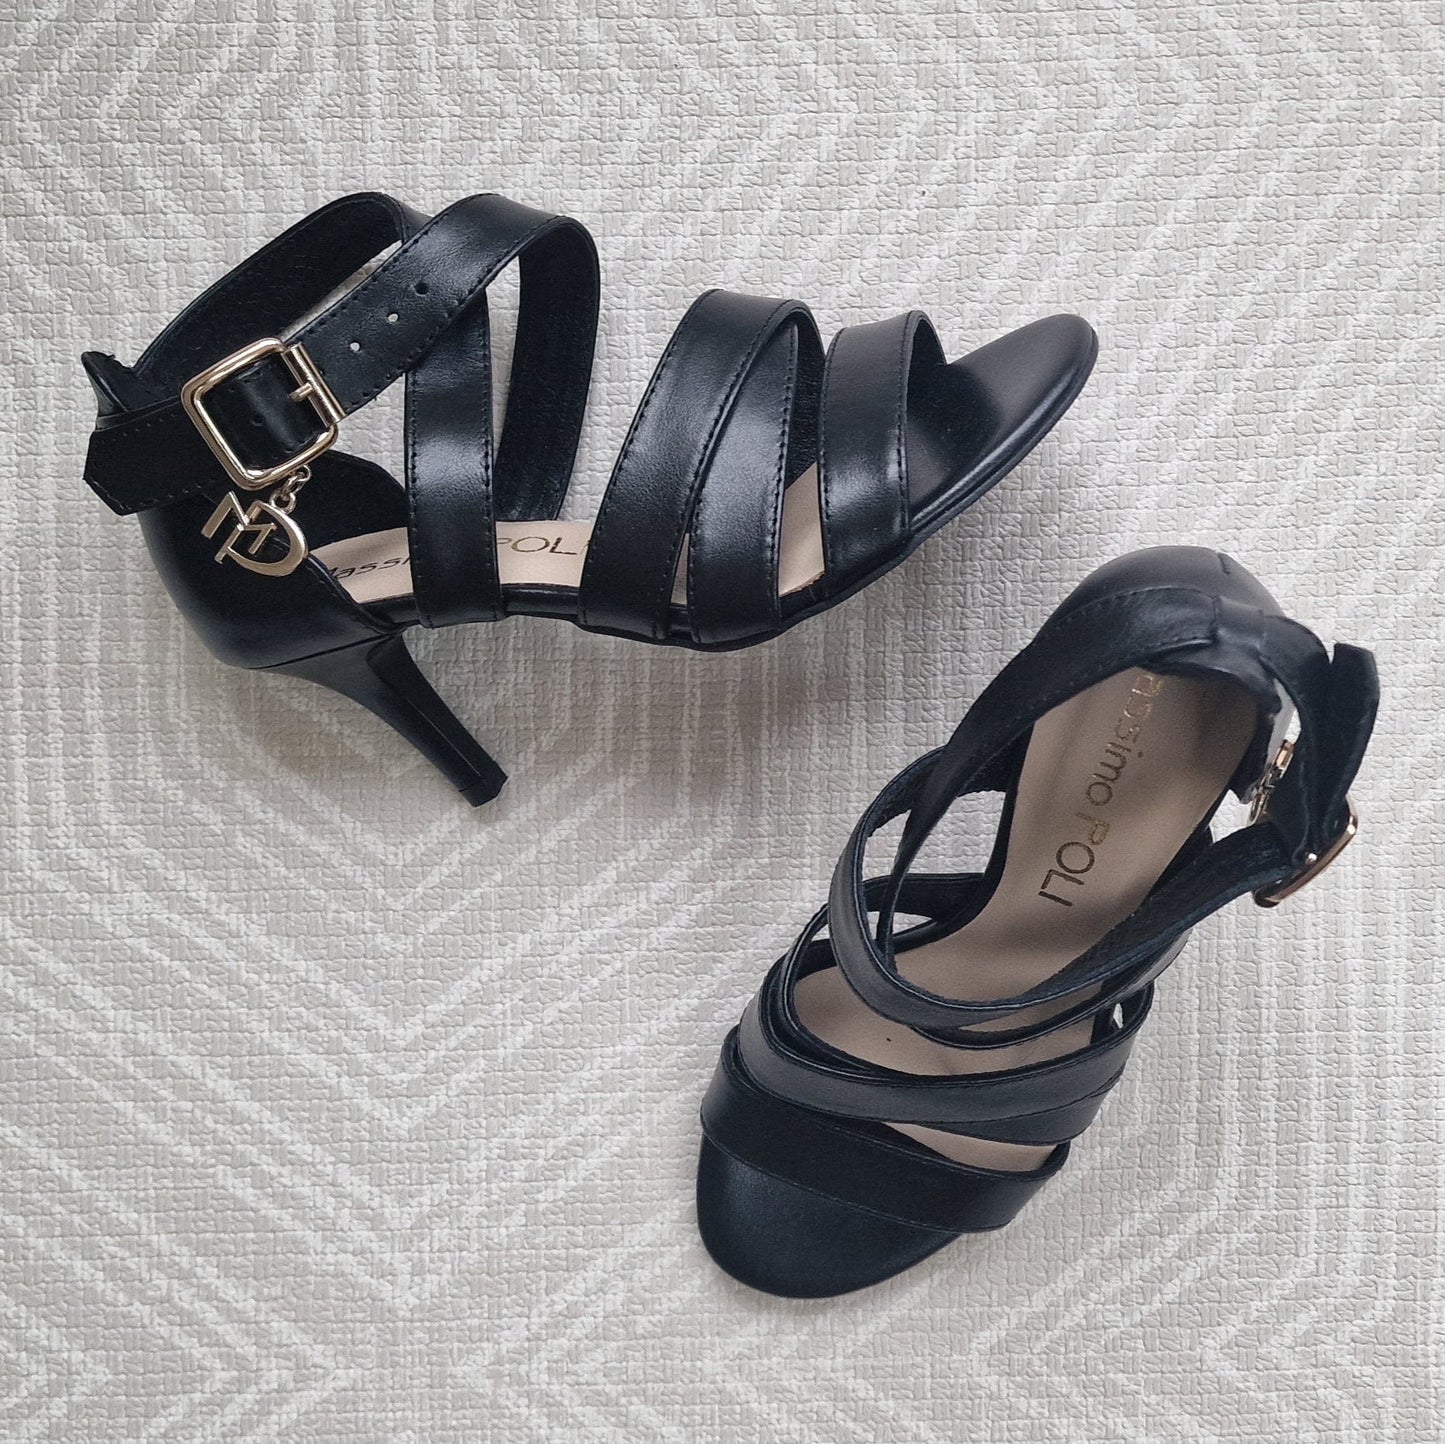 Black leather strappy heels in petite size